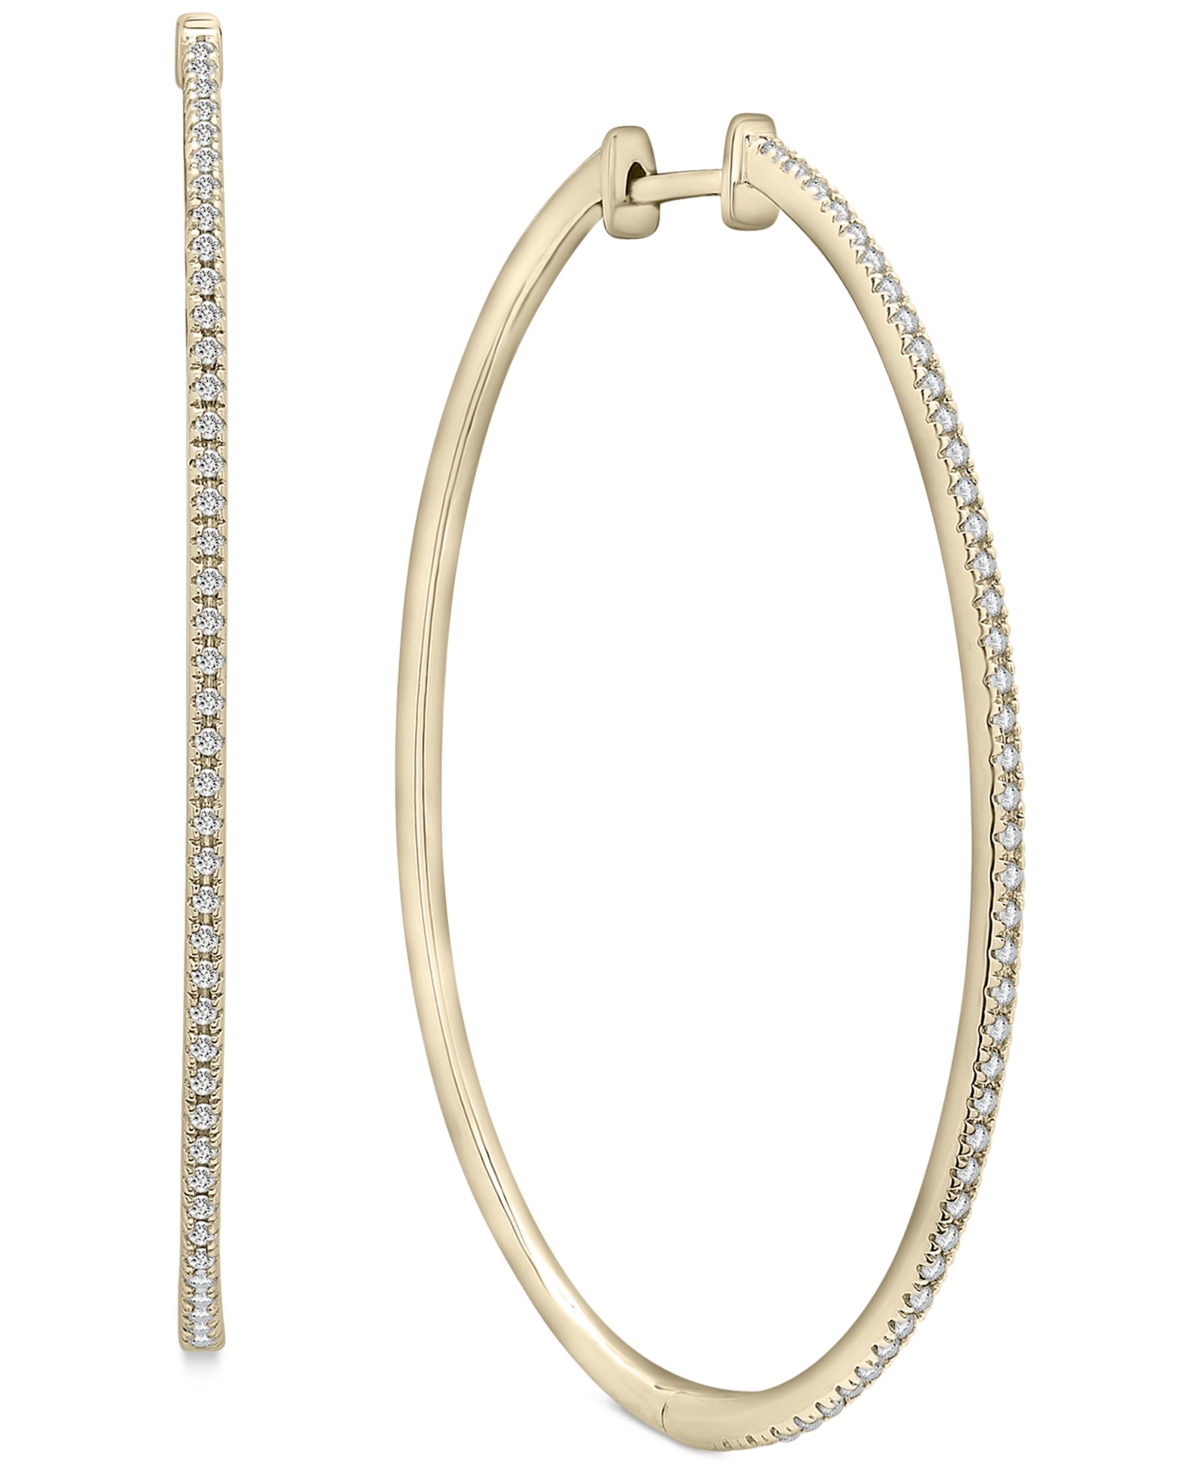 Diamond Medium Hoop Earrings (1/4 ct. t.w.) in 14k Gold-Plated Sterling Silver, 1.5", Created for Macy's - K Yellow Gold Over Sterling Silver